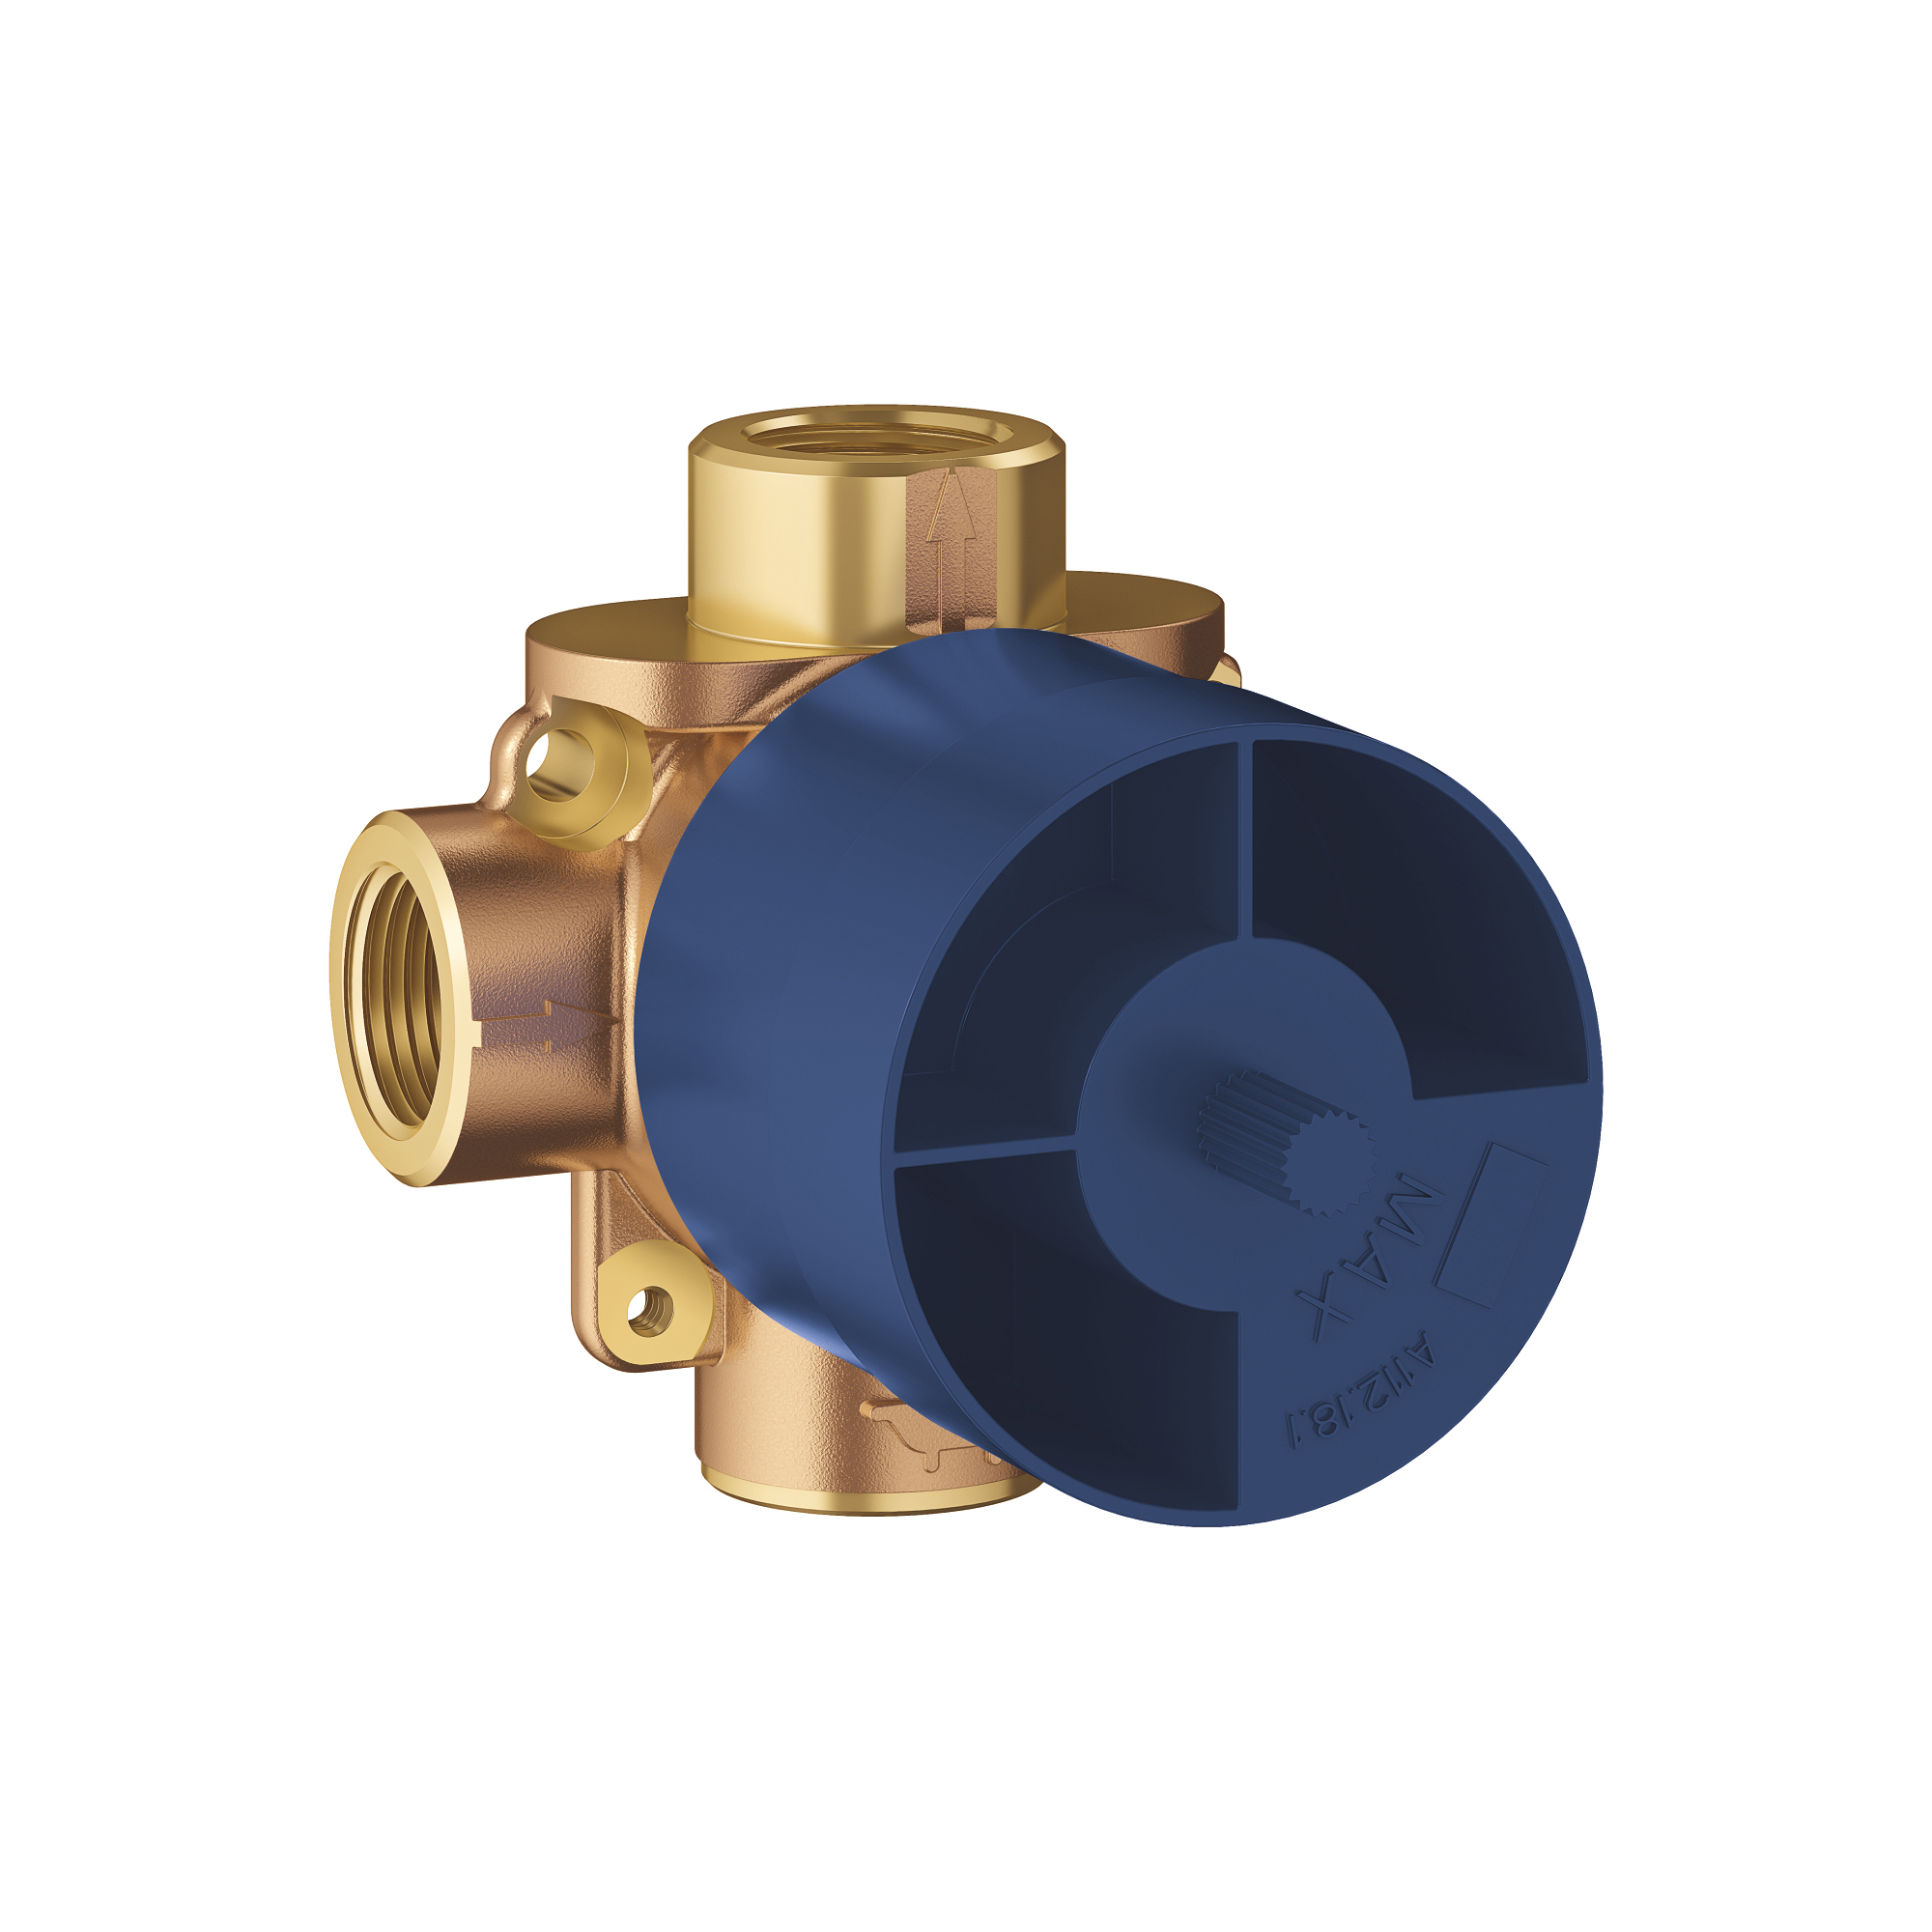 2-Way Diverter Rough-In Valve (Shared Functions)